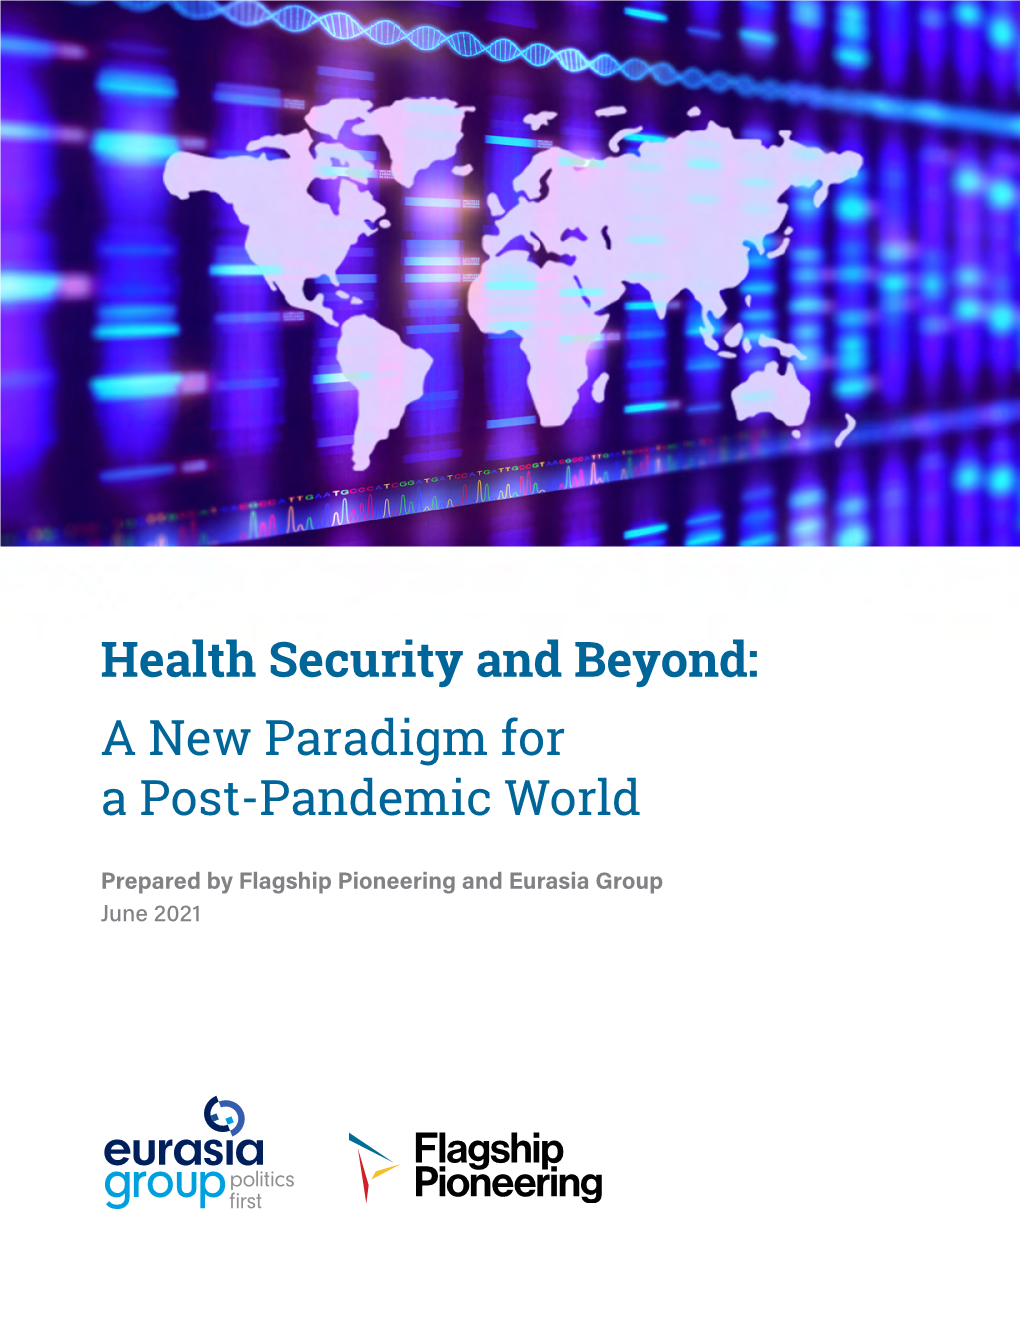 Health Security and Beyond: a New Paradigm for a Post-Pandemic World